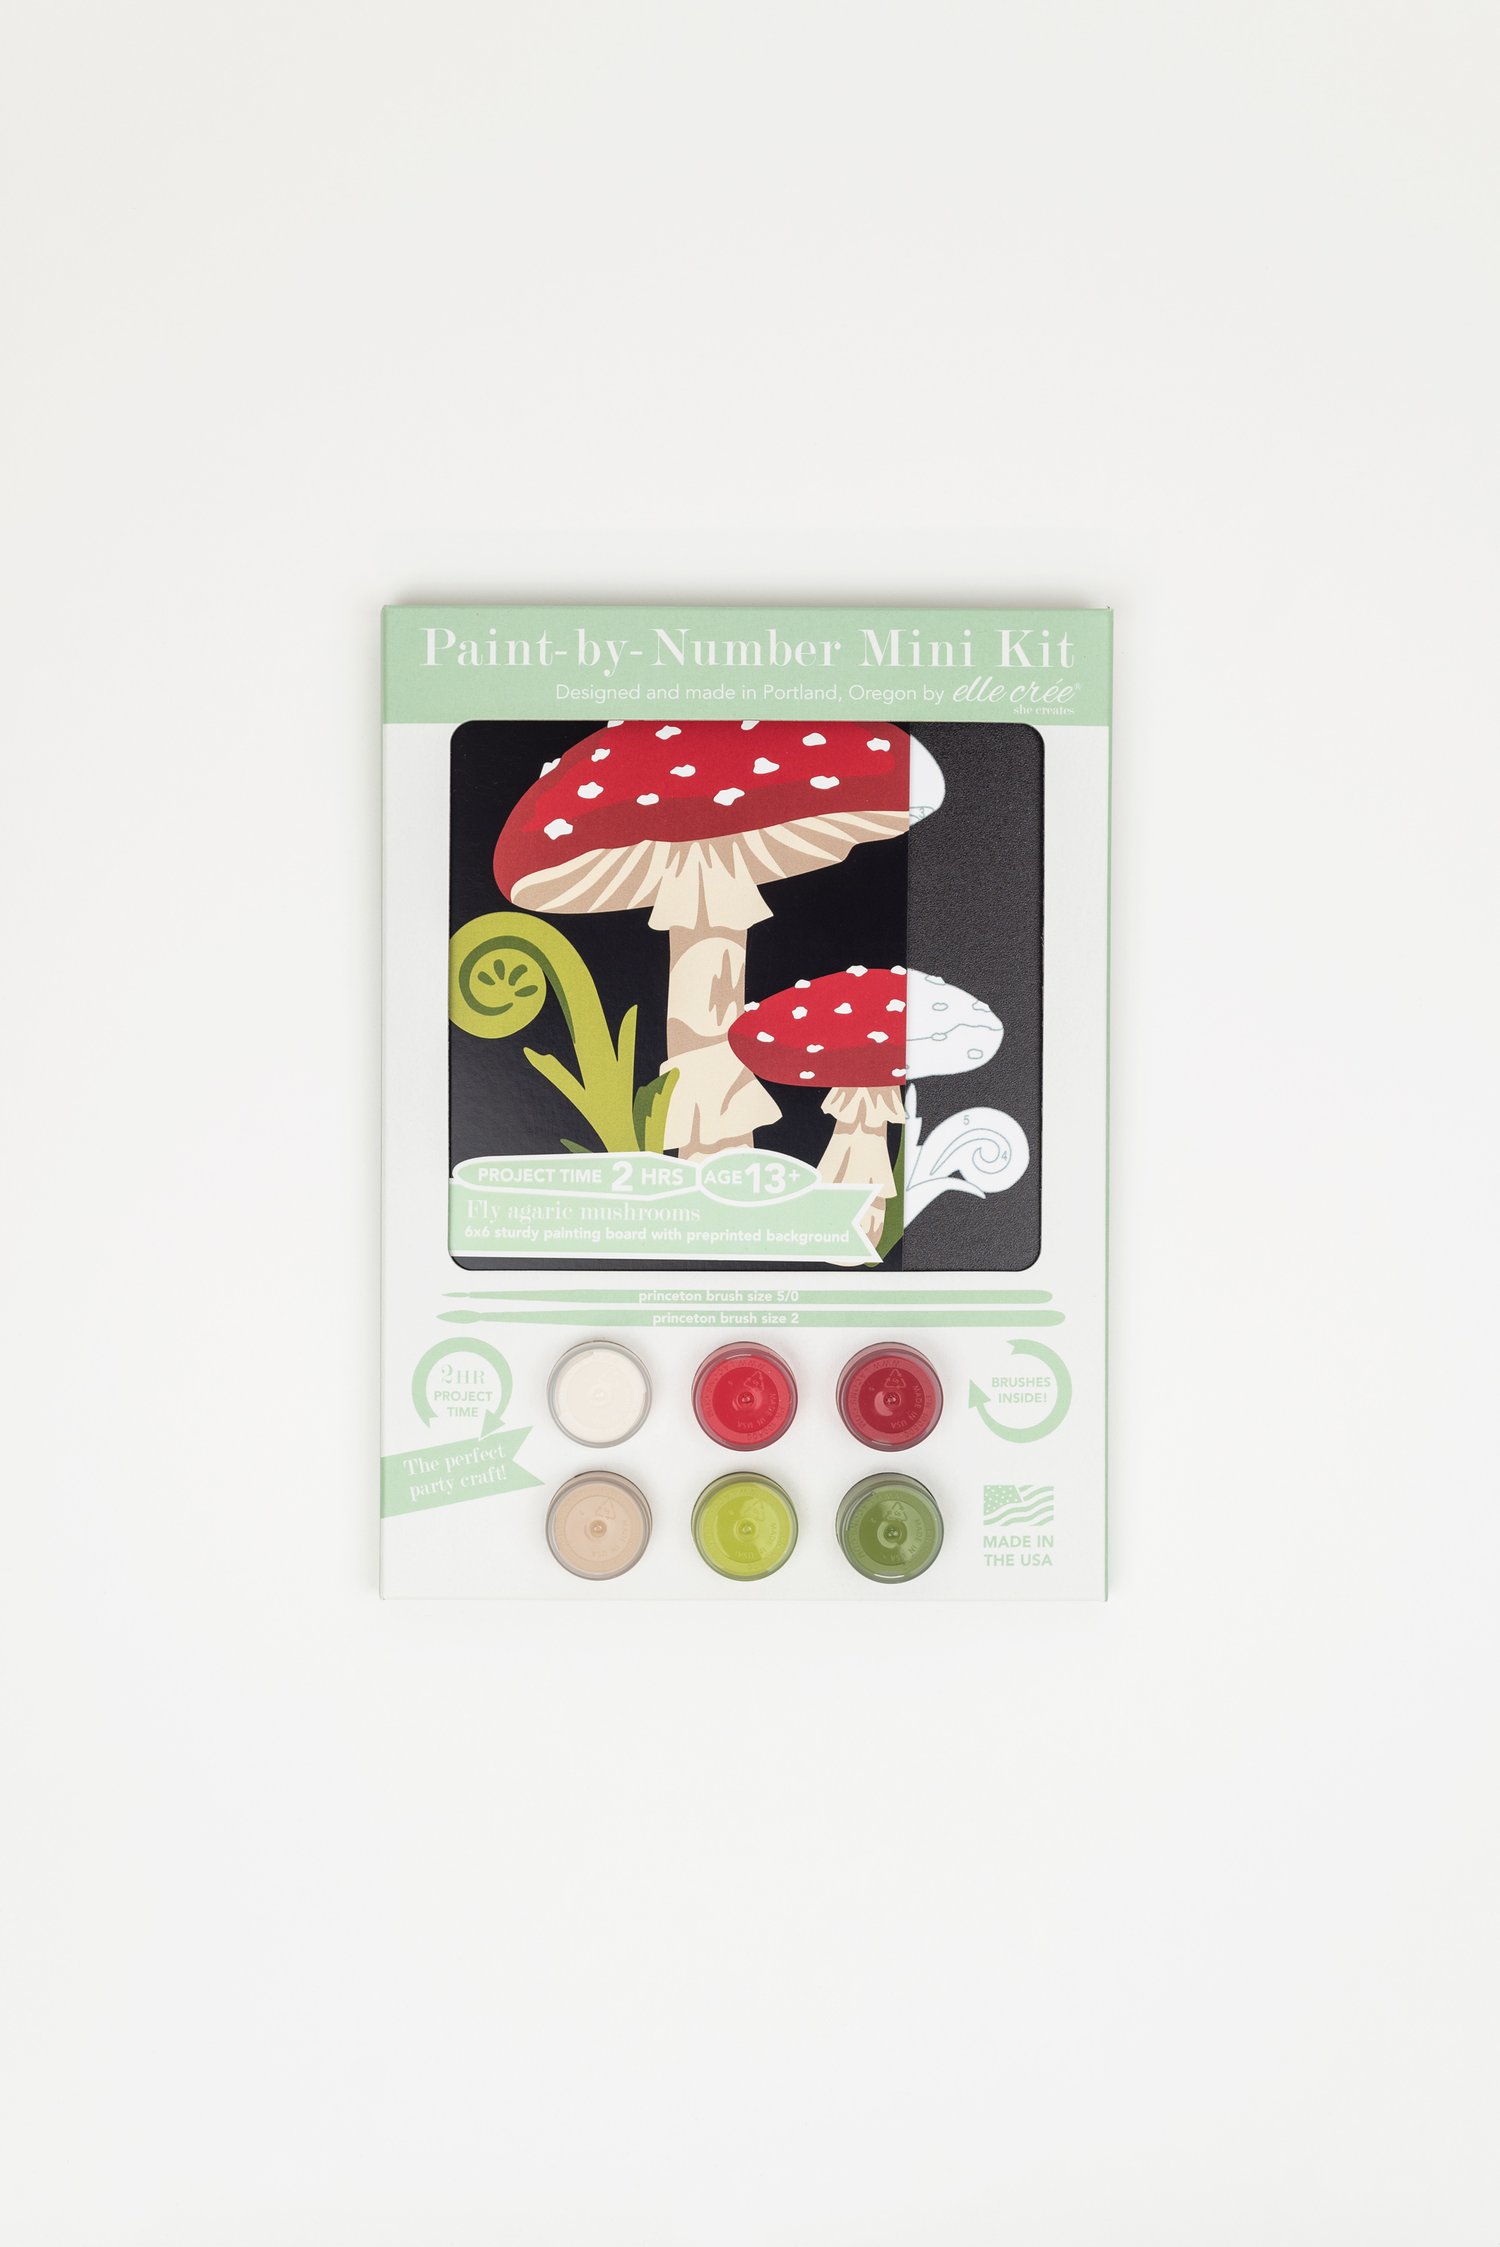 Schipper Enchanted Mushrooms Paint by Number Kit